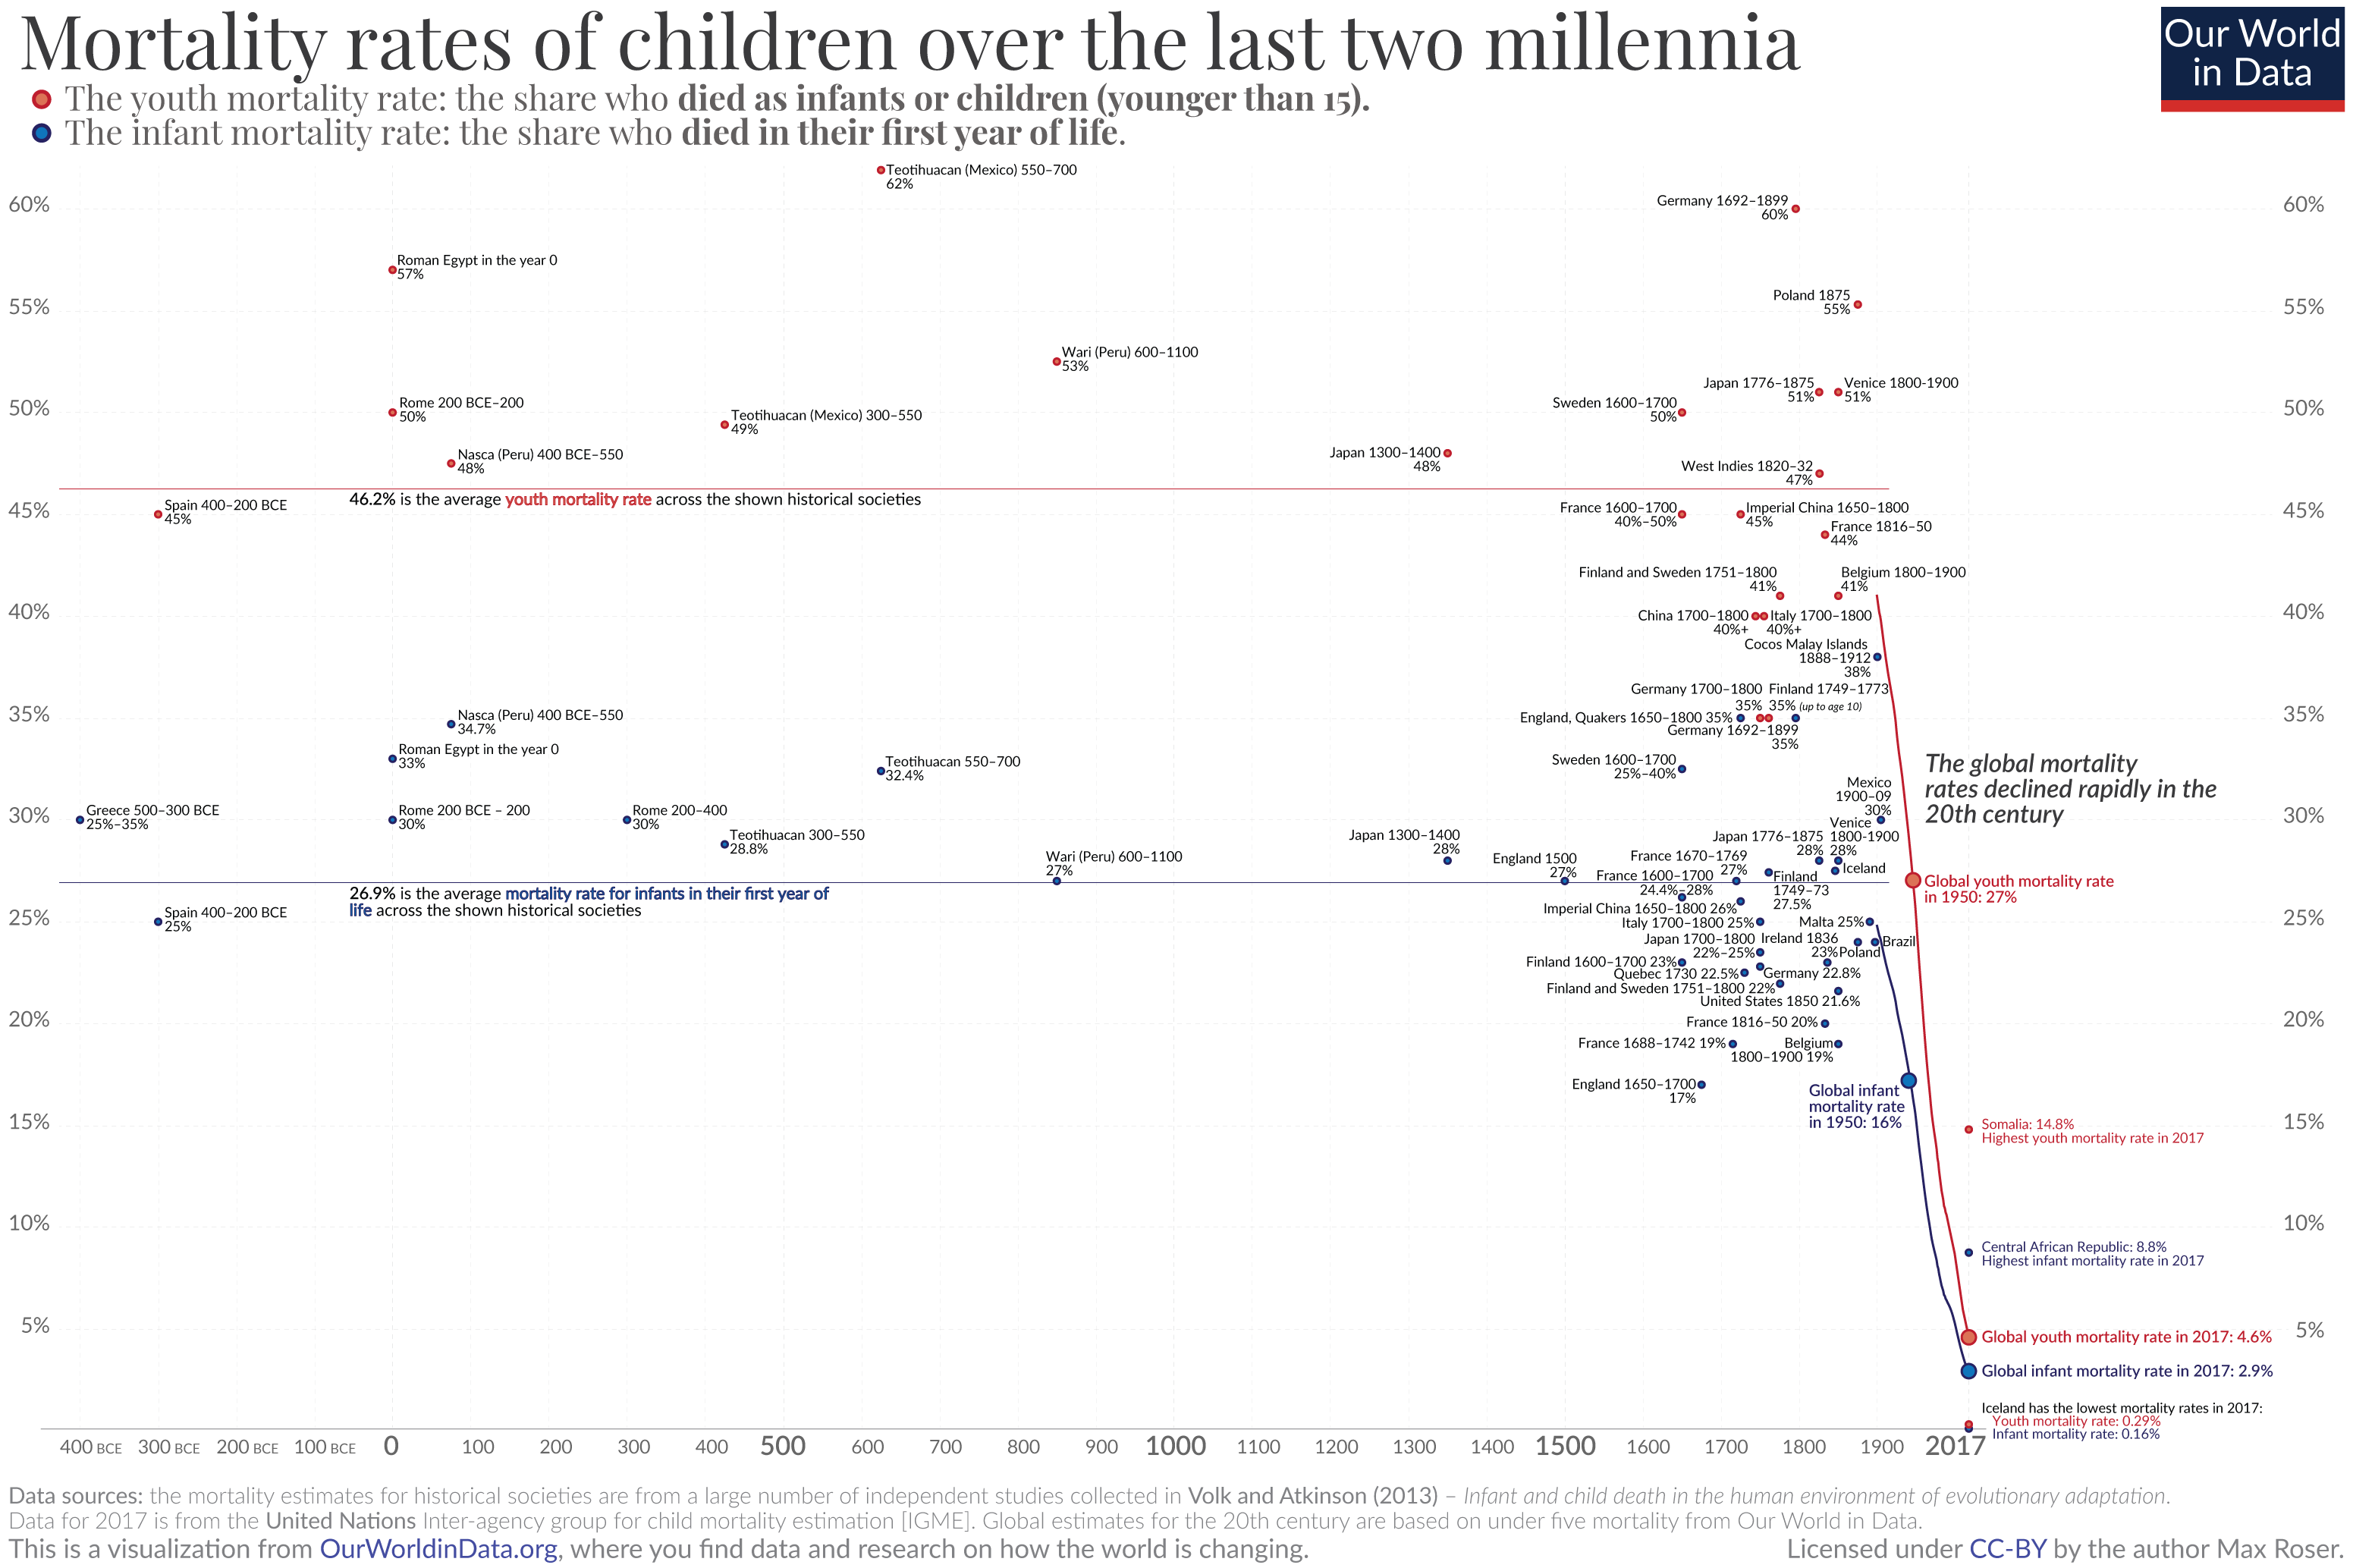 Mortality-rates-of-children-over-last-two-millennia.png